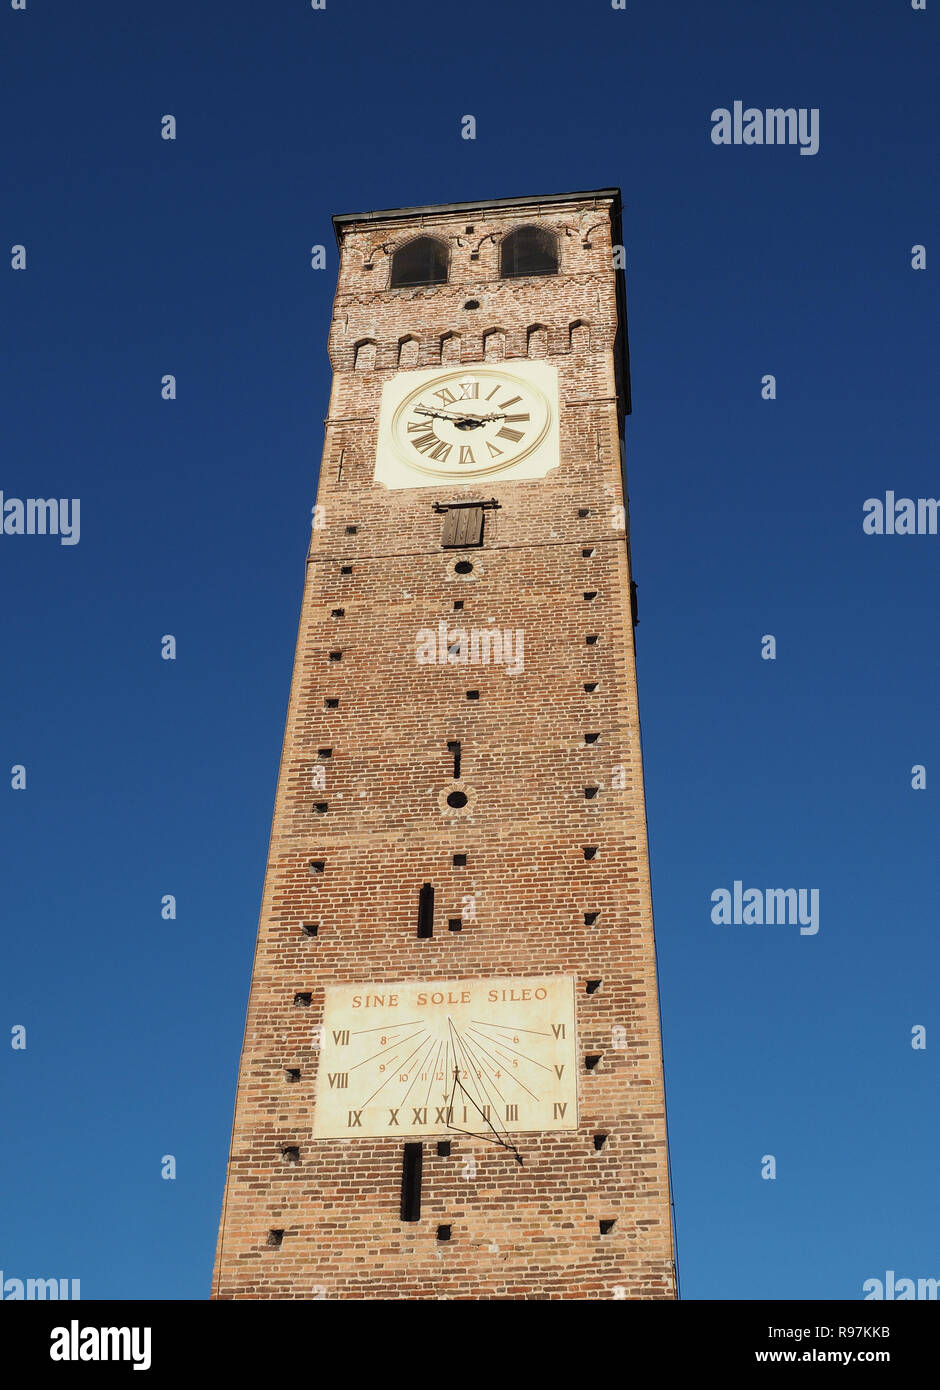 Torre Civica (meaning belfry) in Grugliasco, Italy Stock Photo